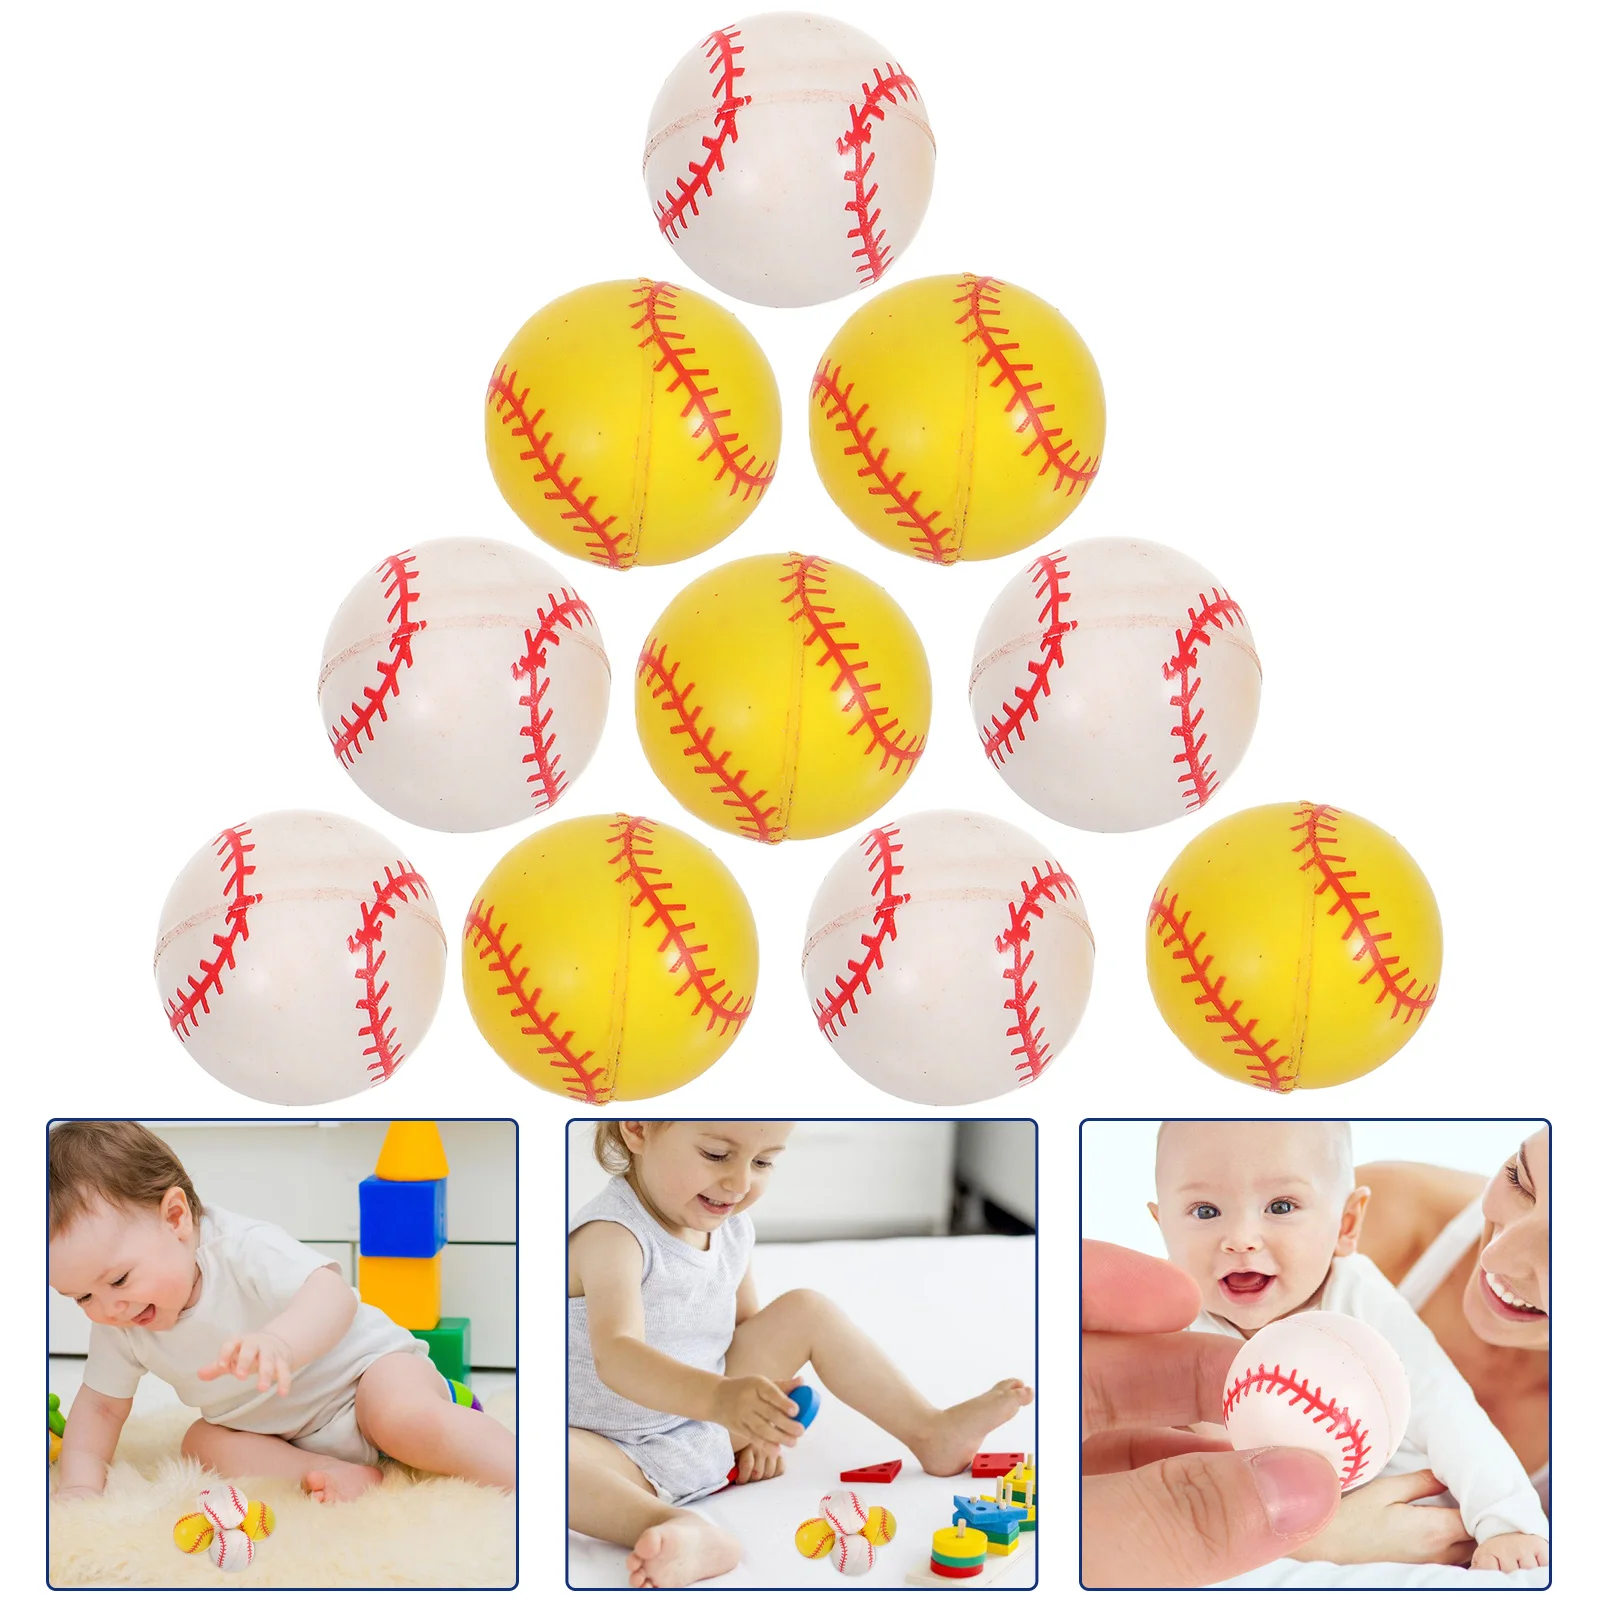 

20 Pcs Toy Baseball Bouncy Educational Rubber Jumping Playing Bouncing Bounce Baby